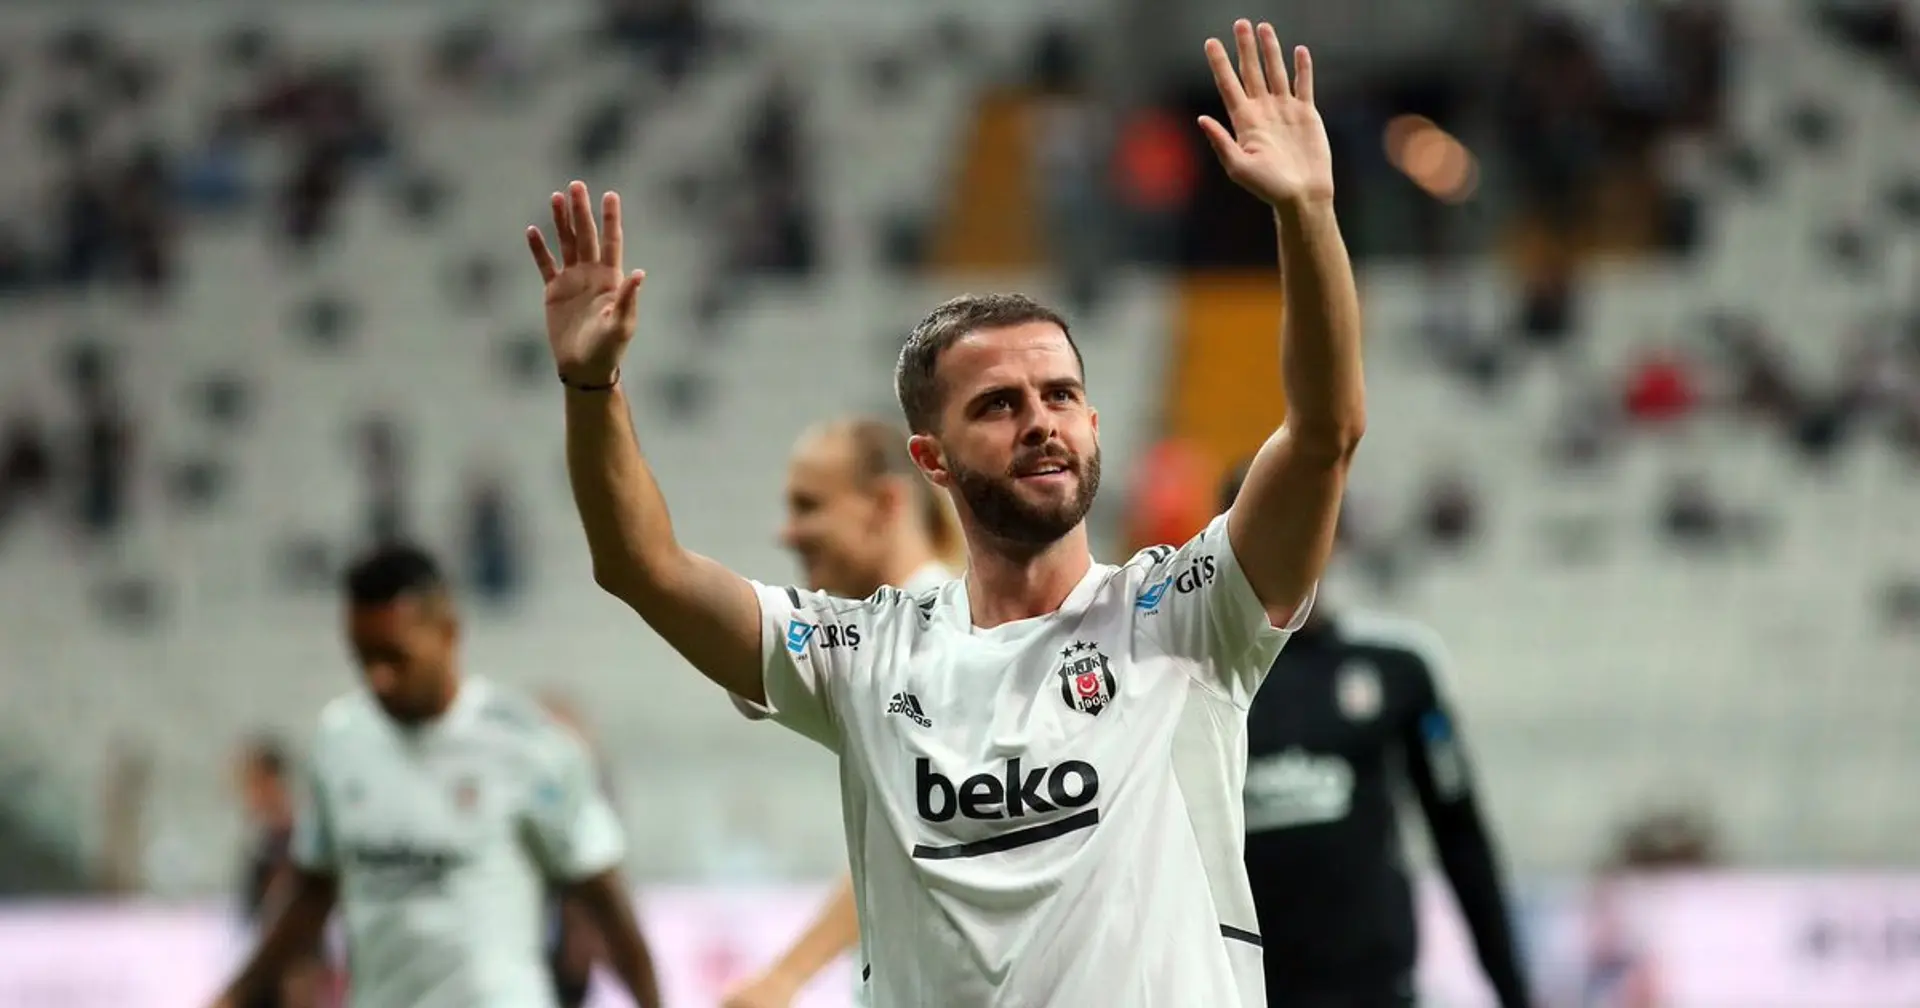 Back with a bang: Pjanic records assist on Besiktas debut